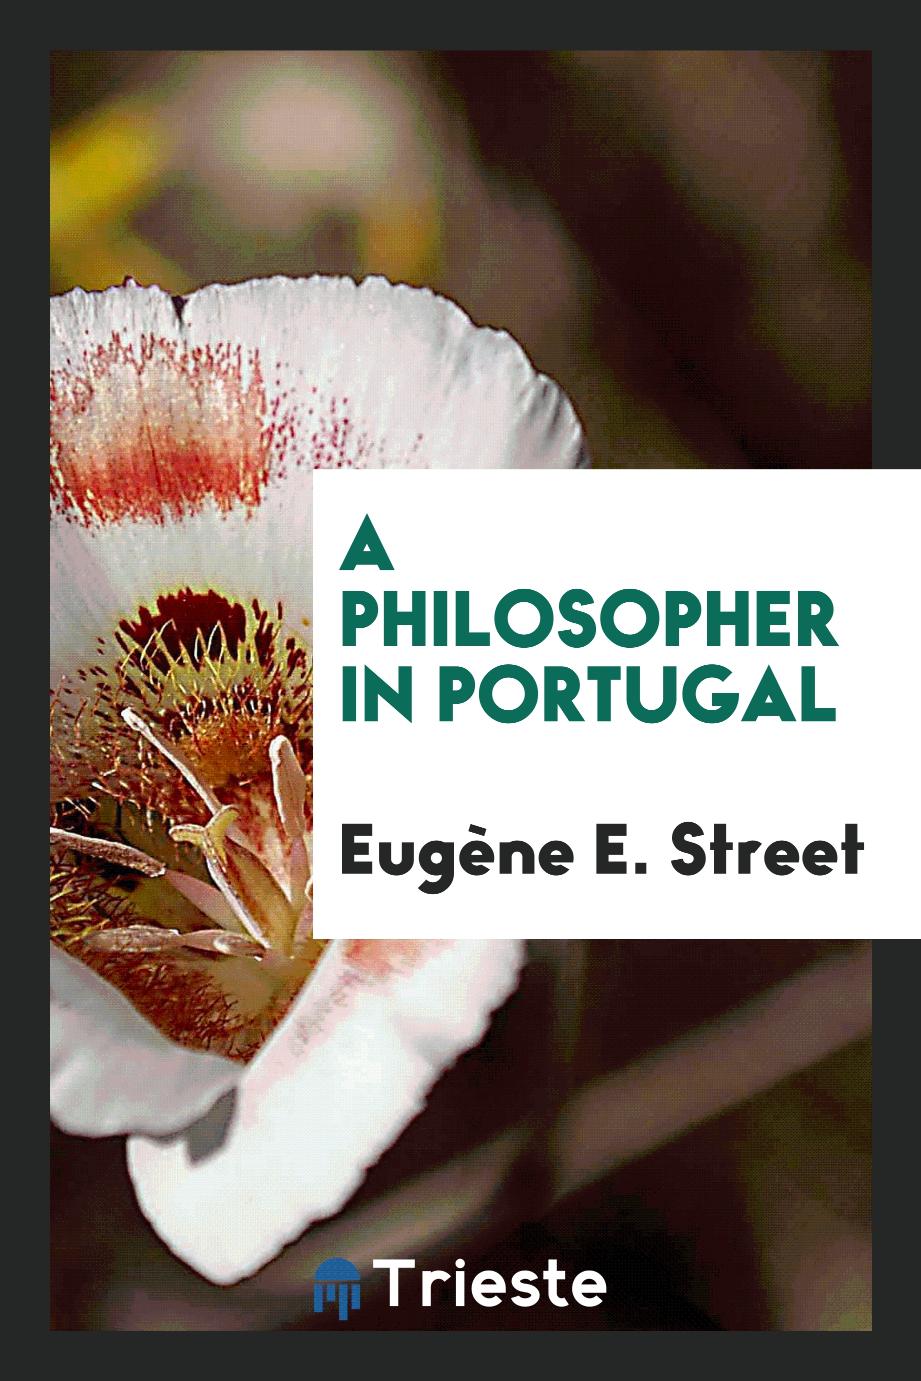 A philosopher in Portugal